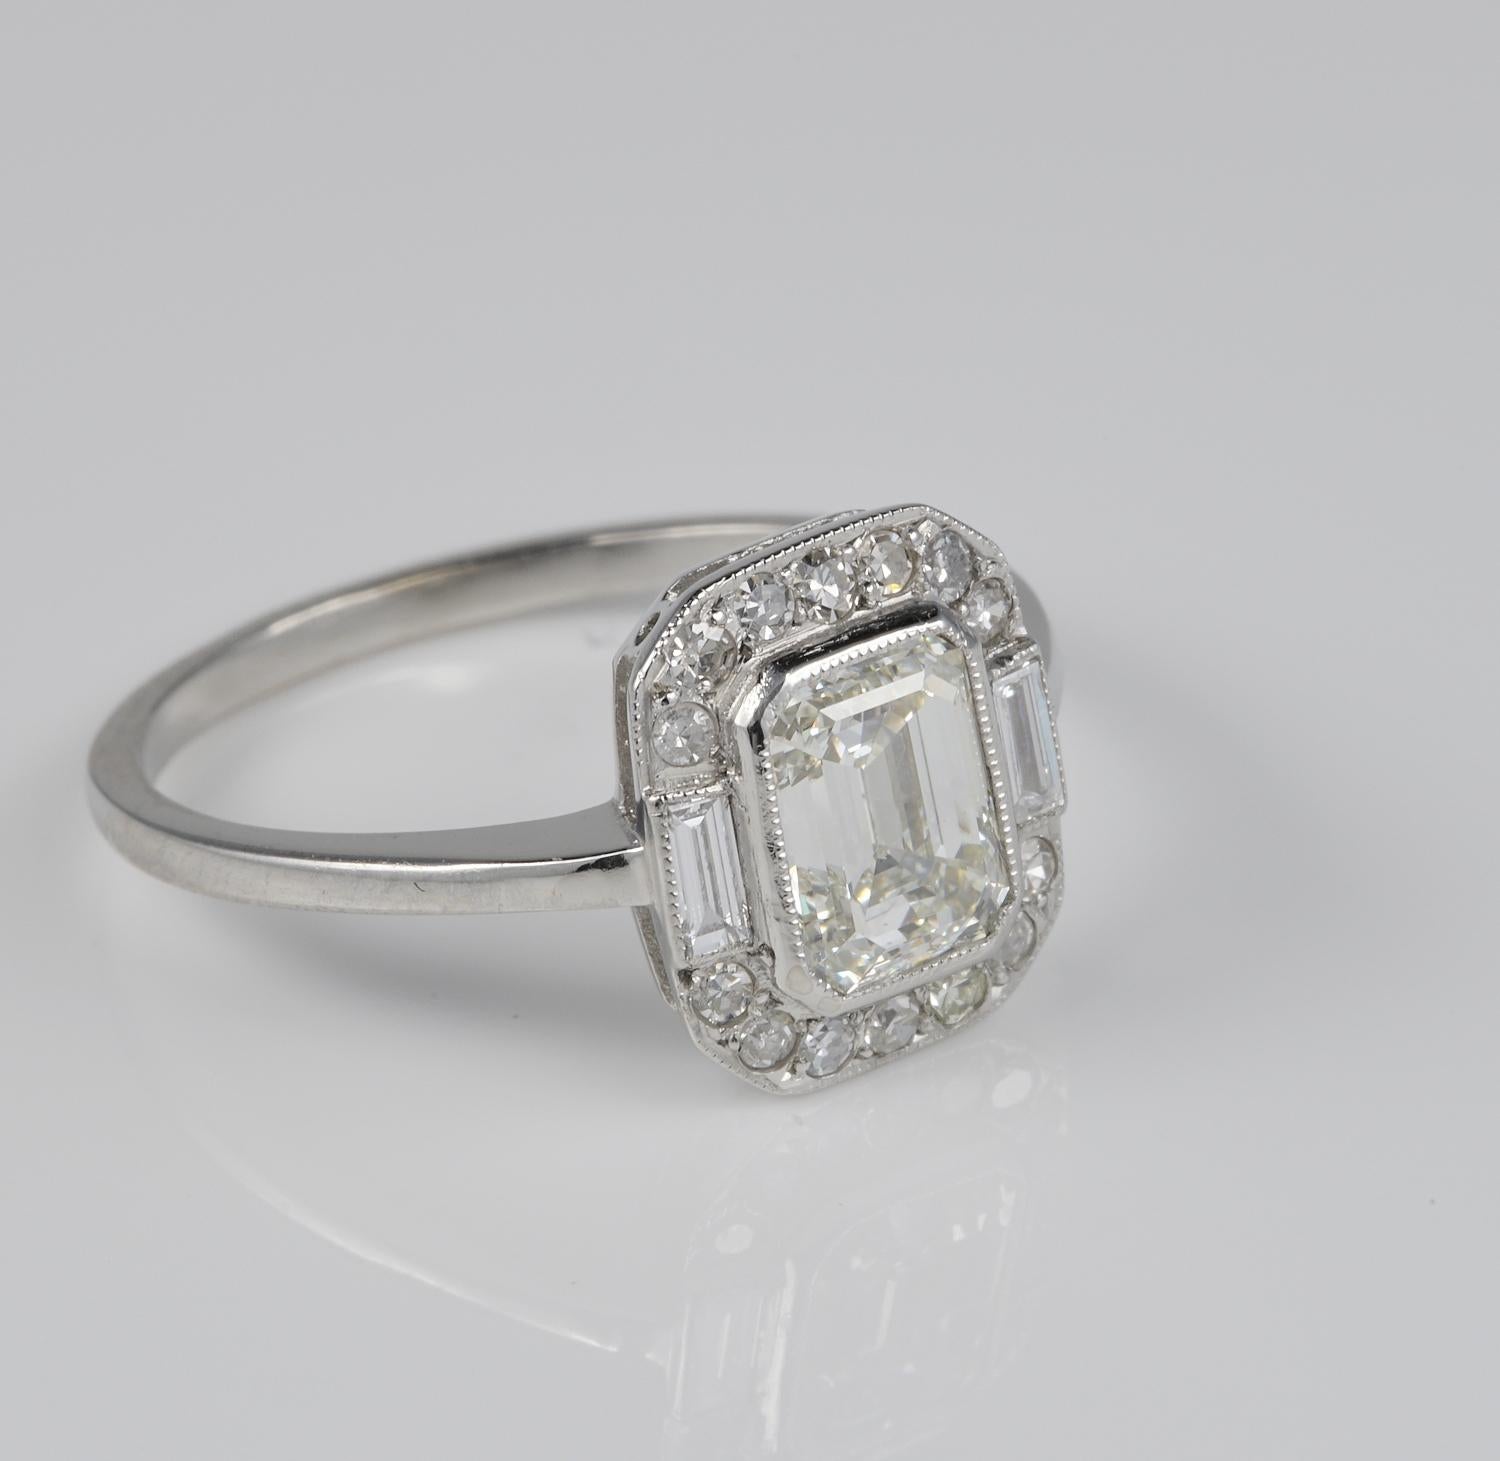 The Winning Deco Style!

This absolutely ever green and most desired style of the Art Deco period is the simple Emerald Cut Diamond flaked by baguette and round cut in a delicate designed frame to complement the main Diamond

This is an authentic